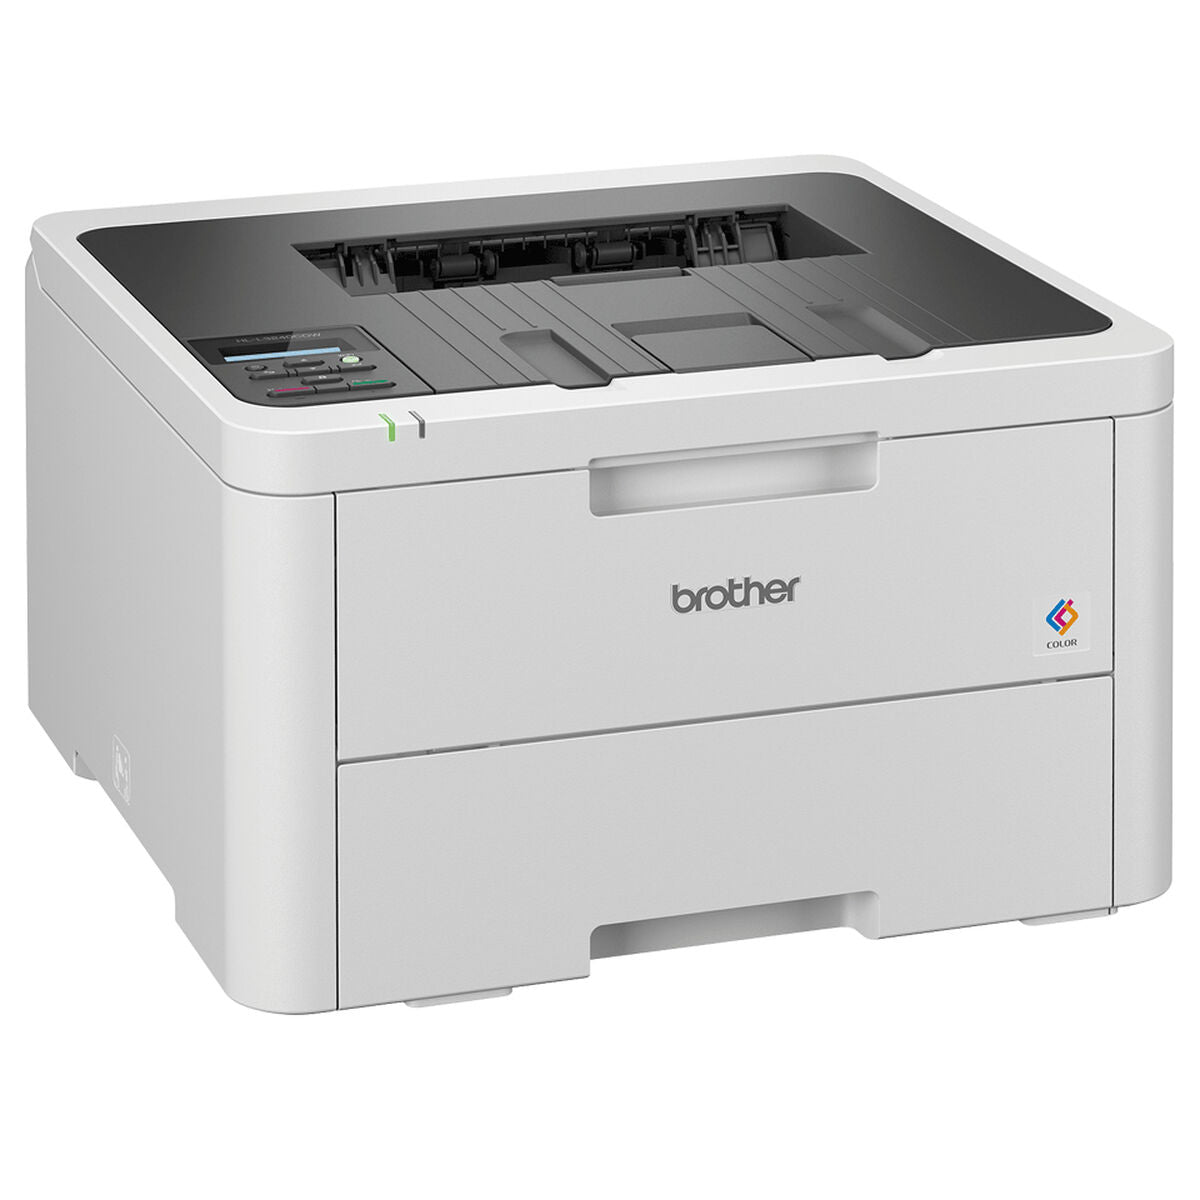 Laser Printer Brother HLL3240CDWRE1, Brother, Computing, Printers and accessories, laser-printer-brother-hll3240cdwre1, :Laser Printer, Brand_Brother, category-reference-2609, category-reference-2642, category-reference-2645, category-reference-t-19685, category-reference-t-19911, category-reference-t-21378, category-reference-t-25690, computers / peripherals, Condition_NEW, office, Price_200 - 300, Teleworking, RiotNook